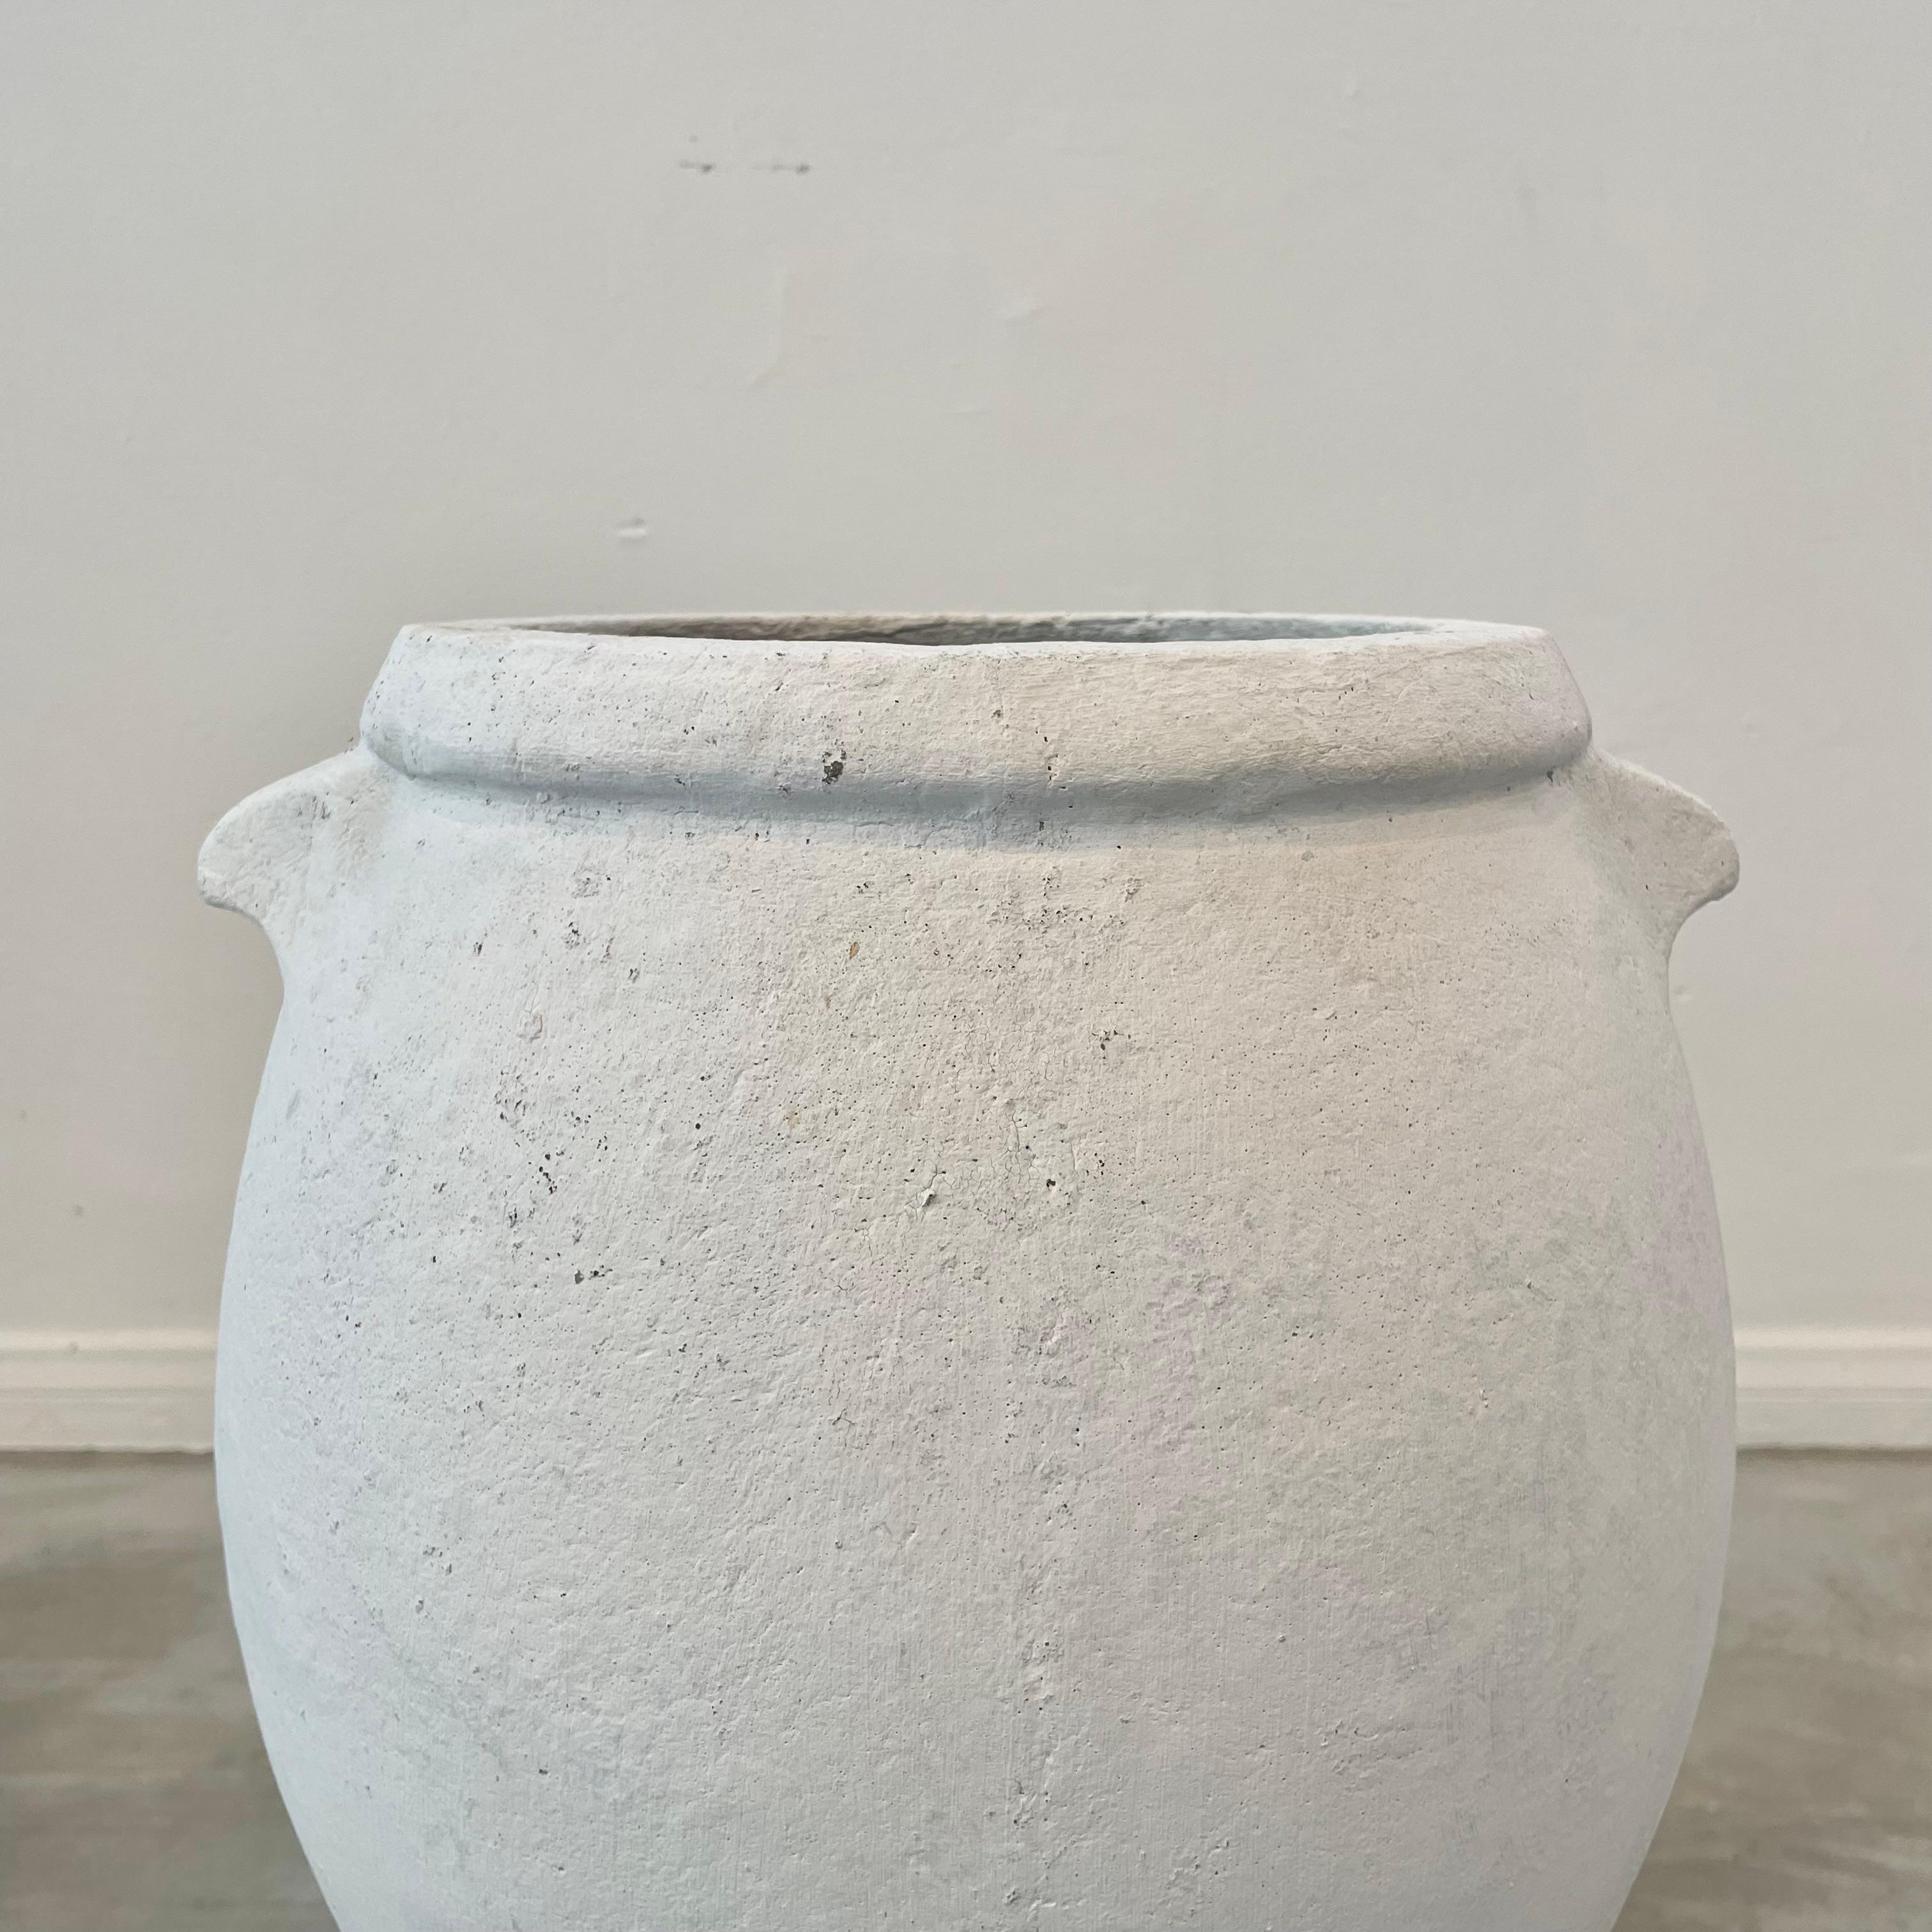 Willy Guhl Concrete Urn with Handles, 1960s Switzerland In Good Condition For Sale In Los Angeles, CA